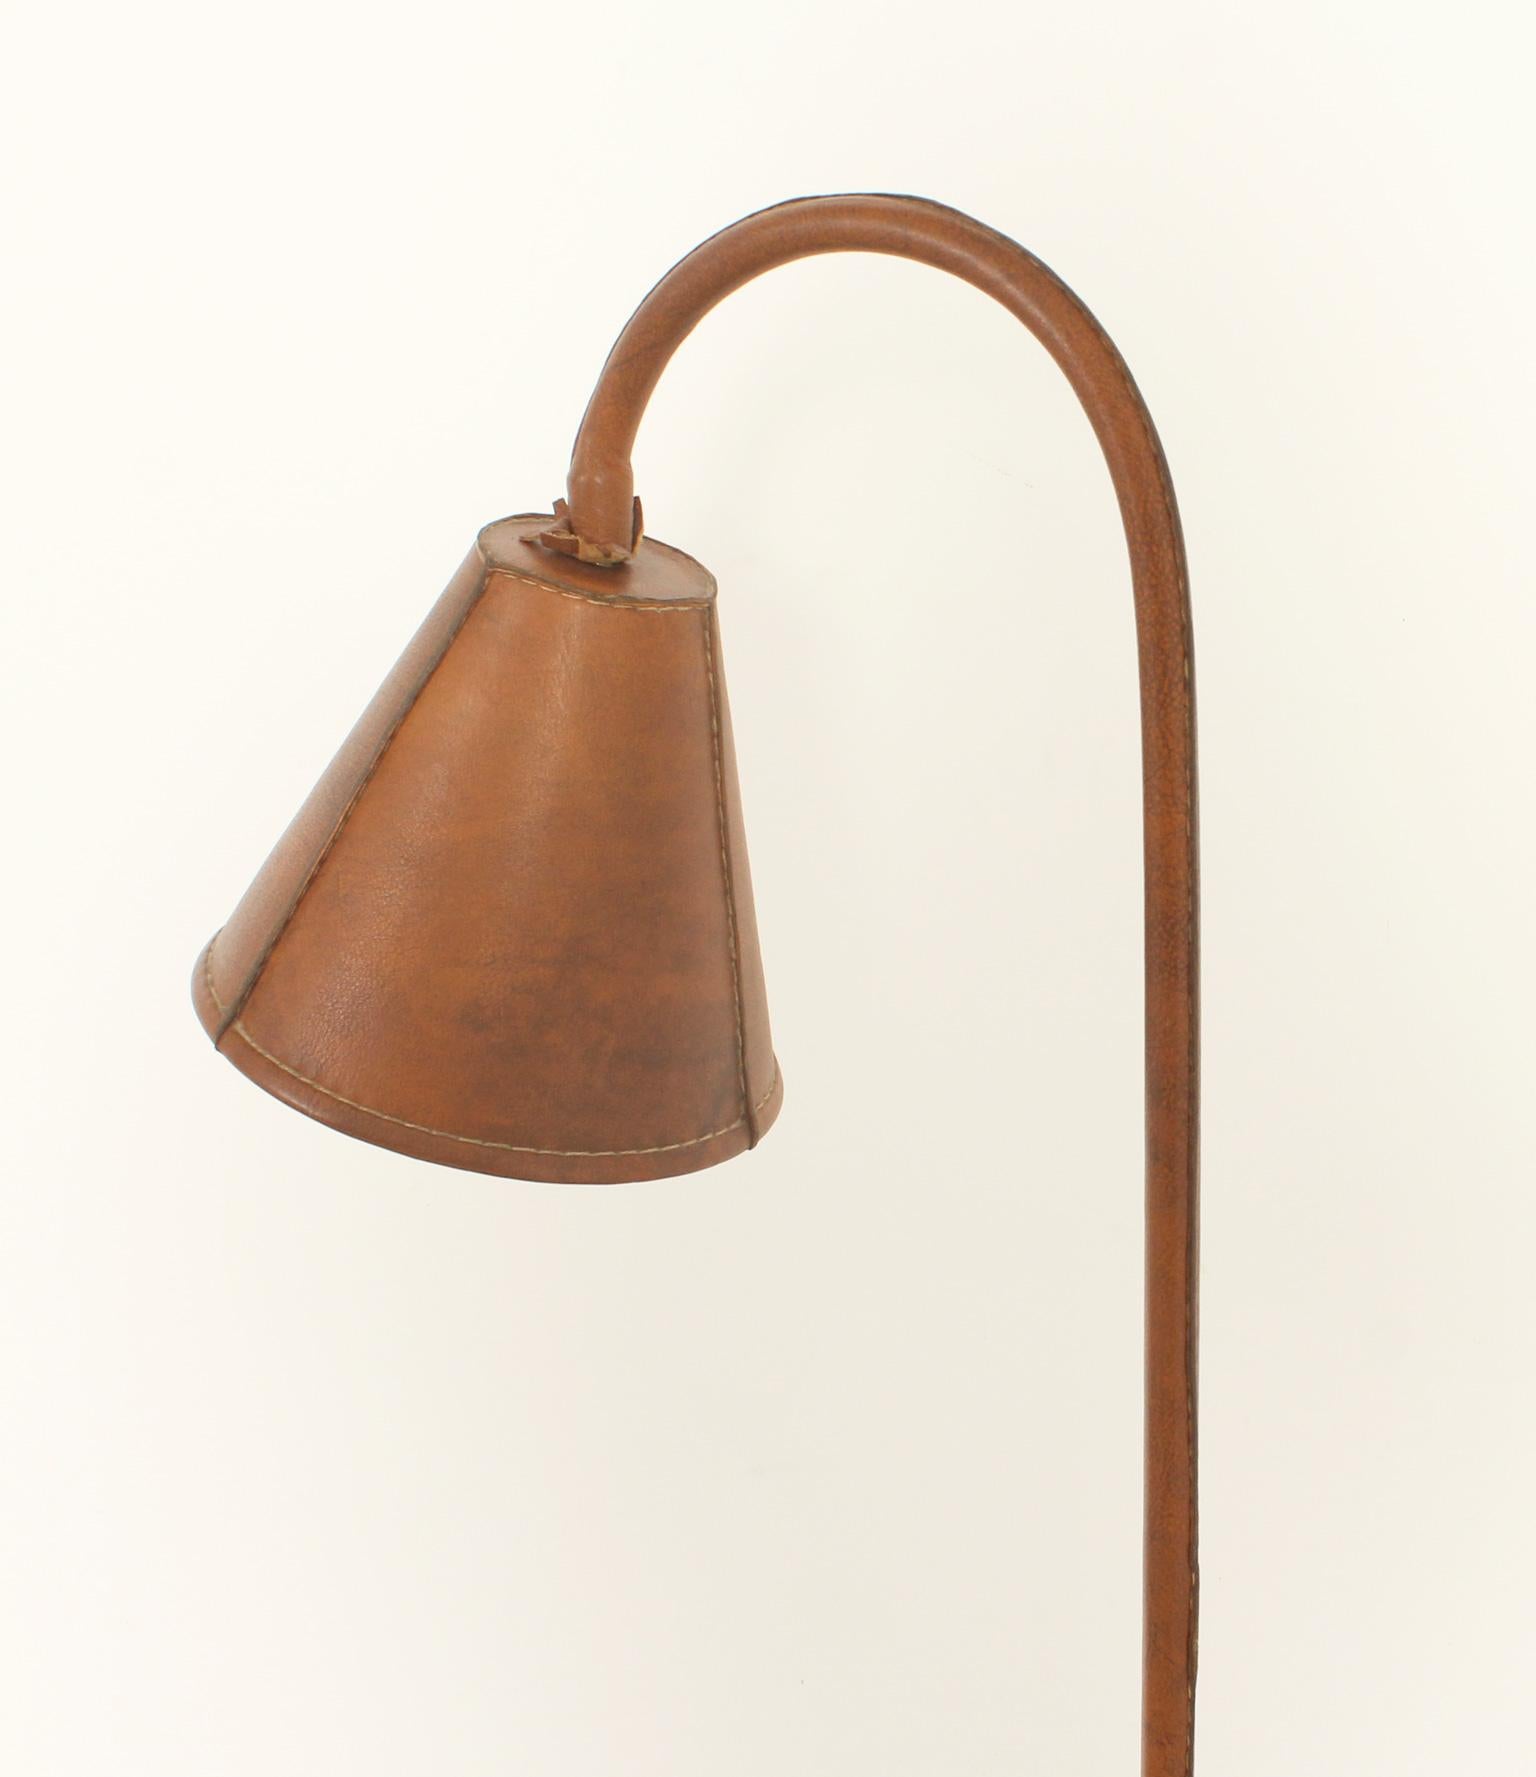 Mid-20th Century Floor Lamp by Valenti in Brown Leather, Spain, 1950's For Sale